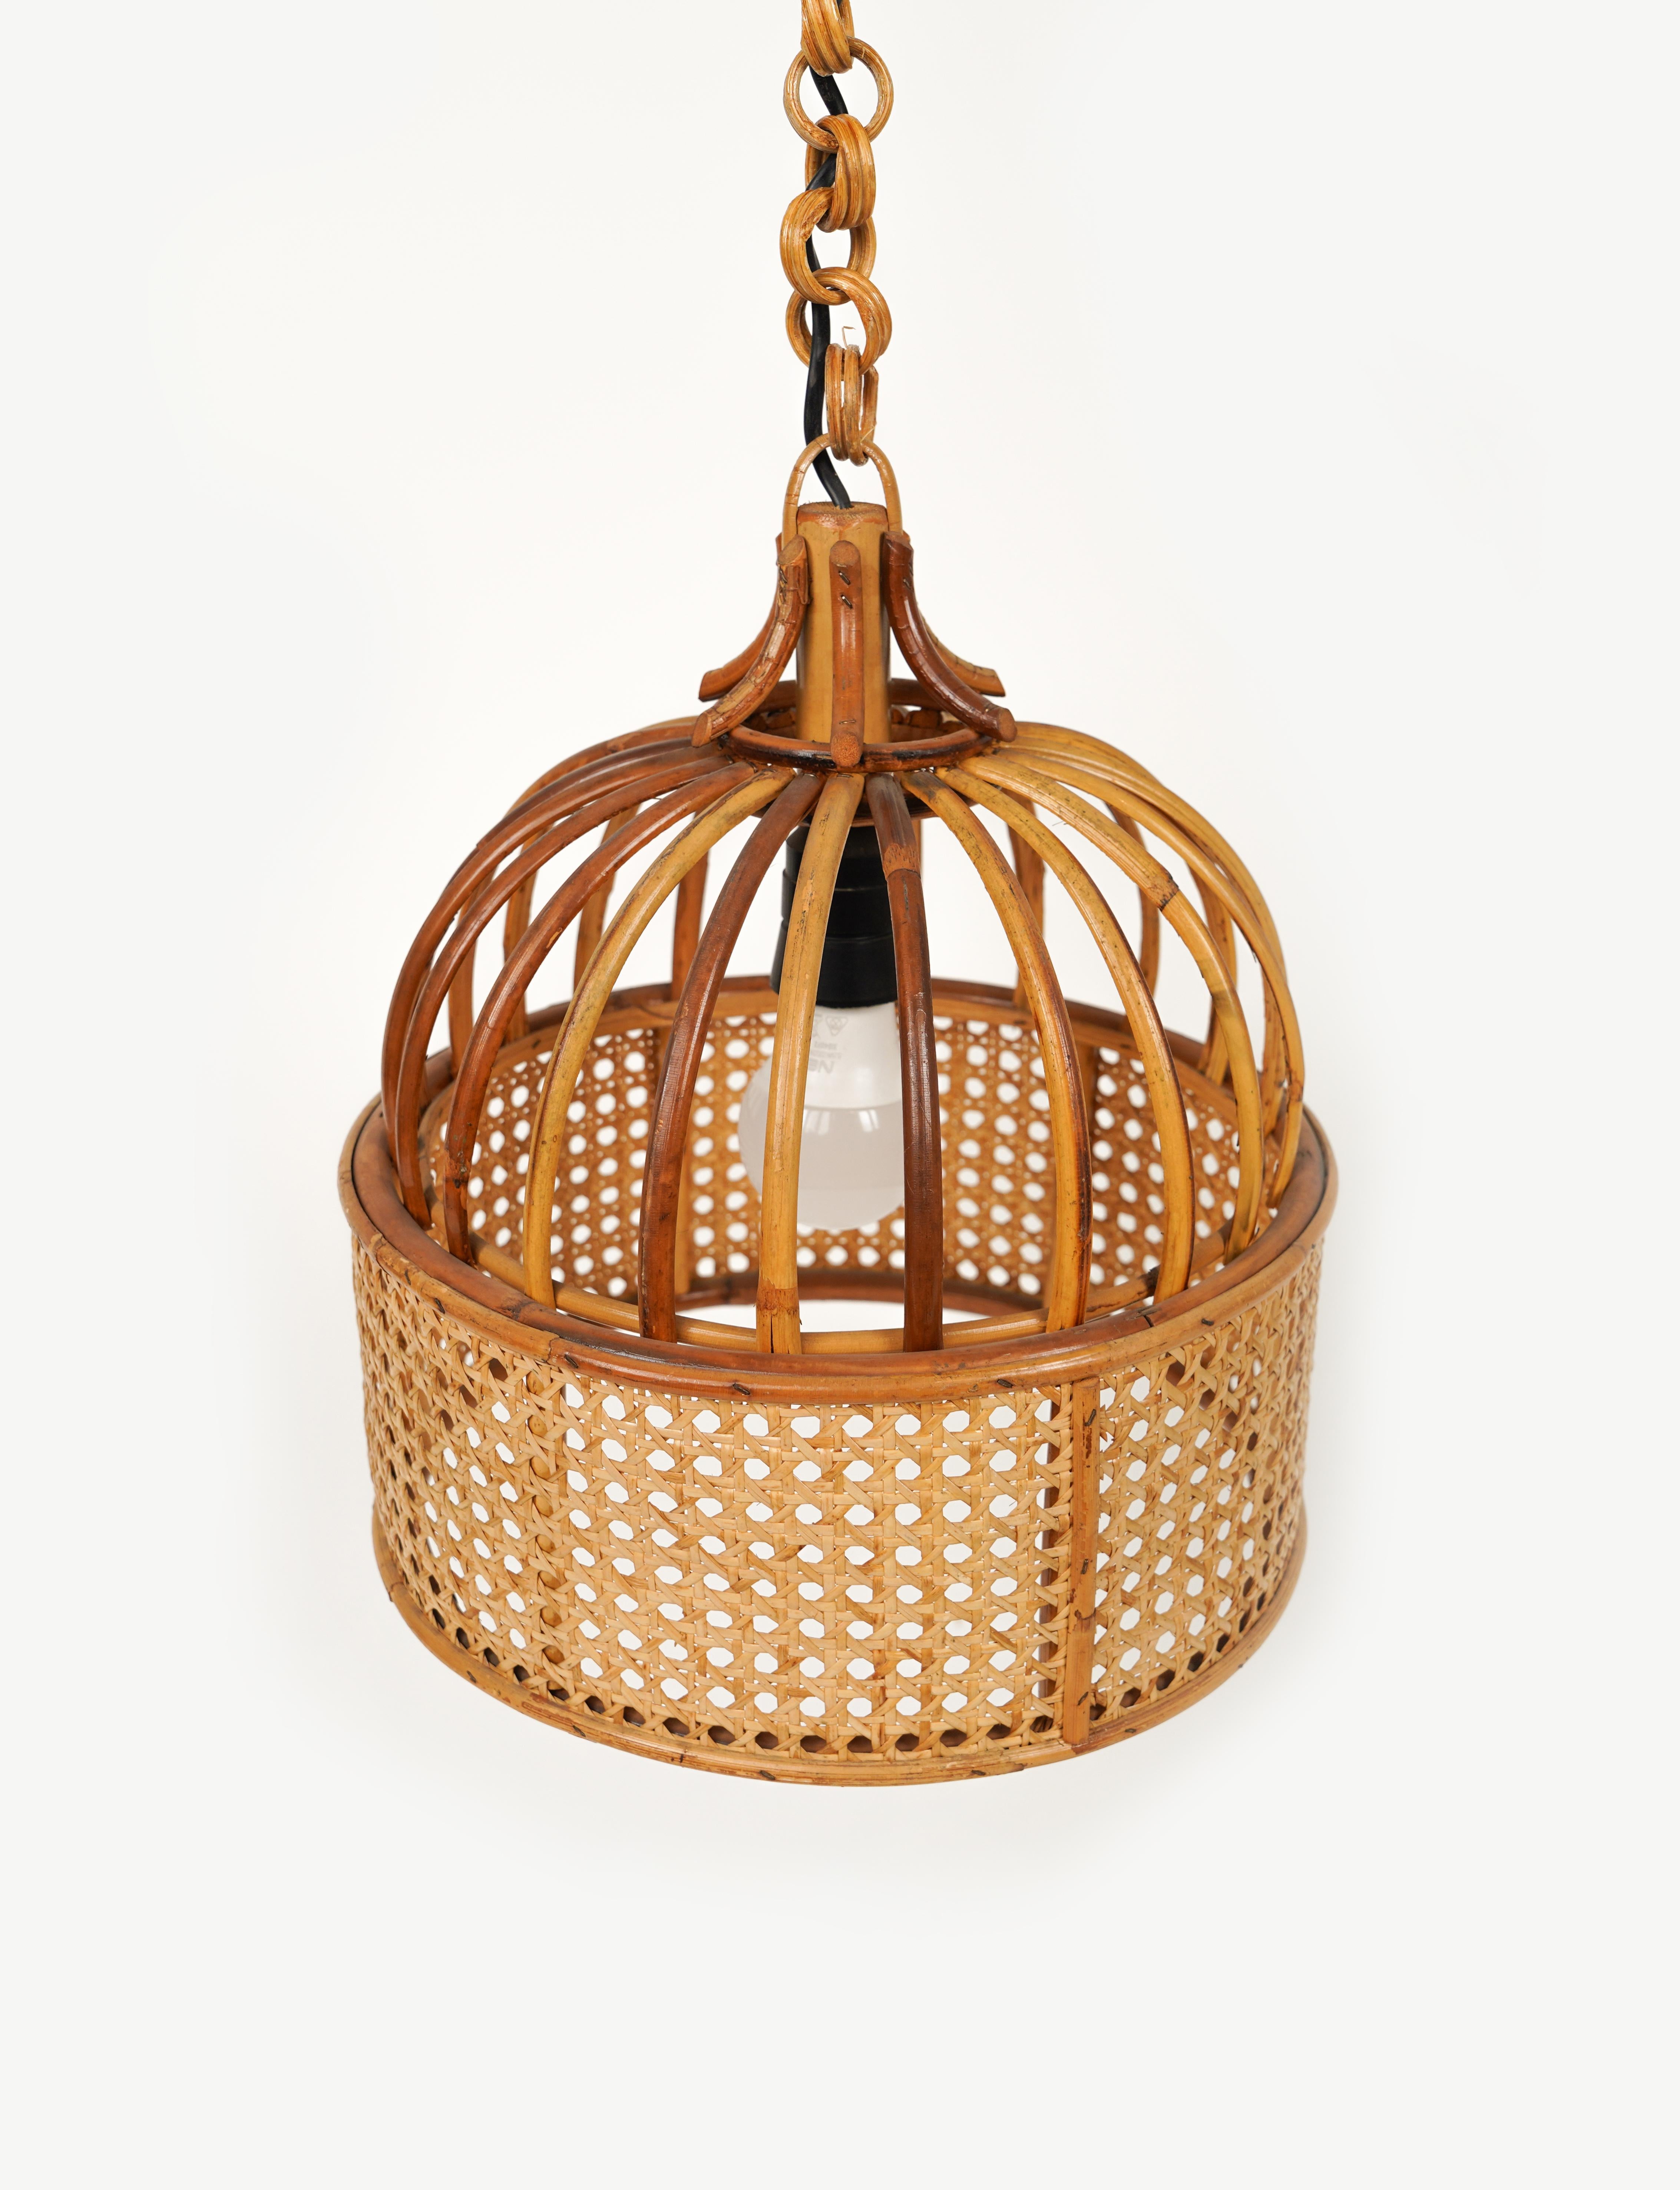 Bamboo Midcentury French Riviera Rattan and Wicker Chandelier, Italy 1970s For Sale